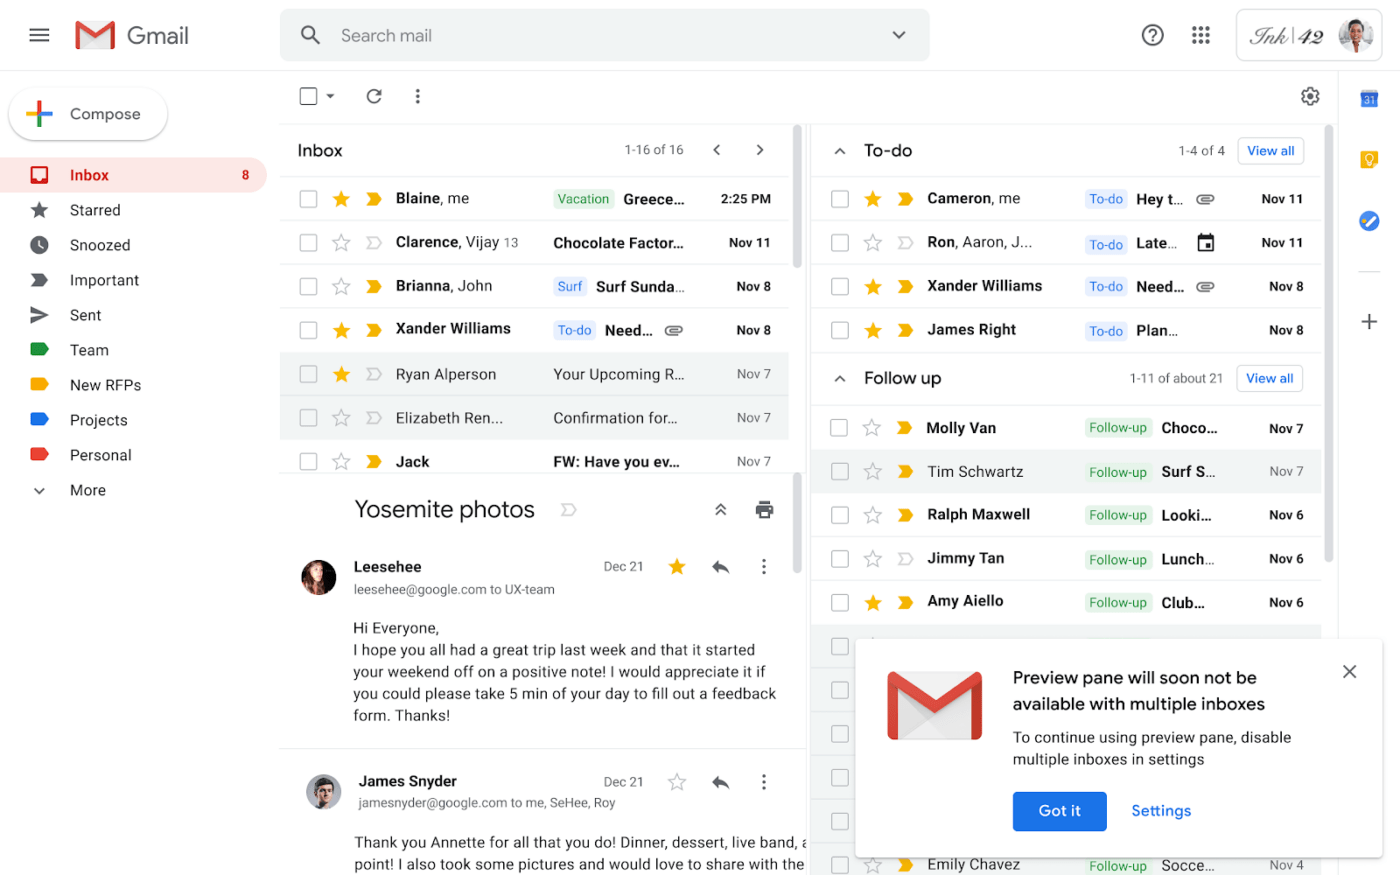 Multiple inboxes in Gmail